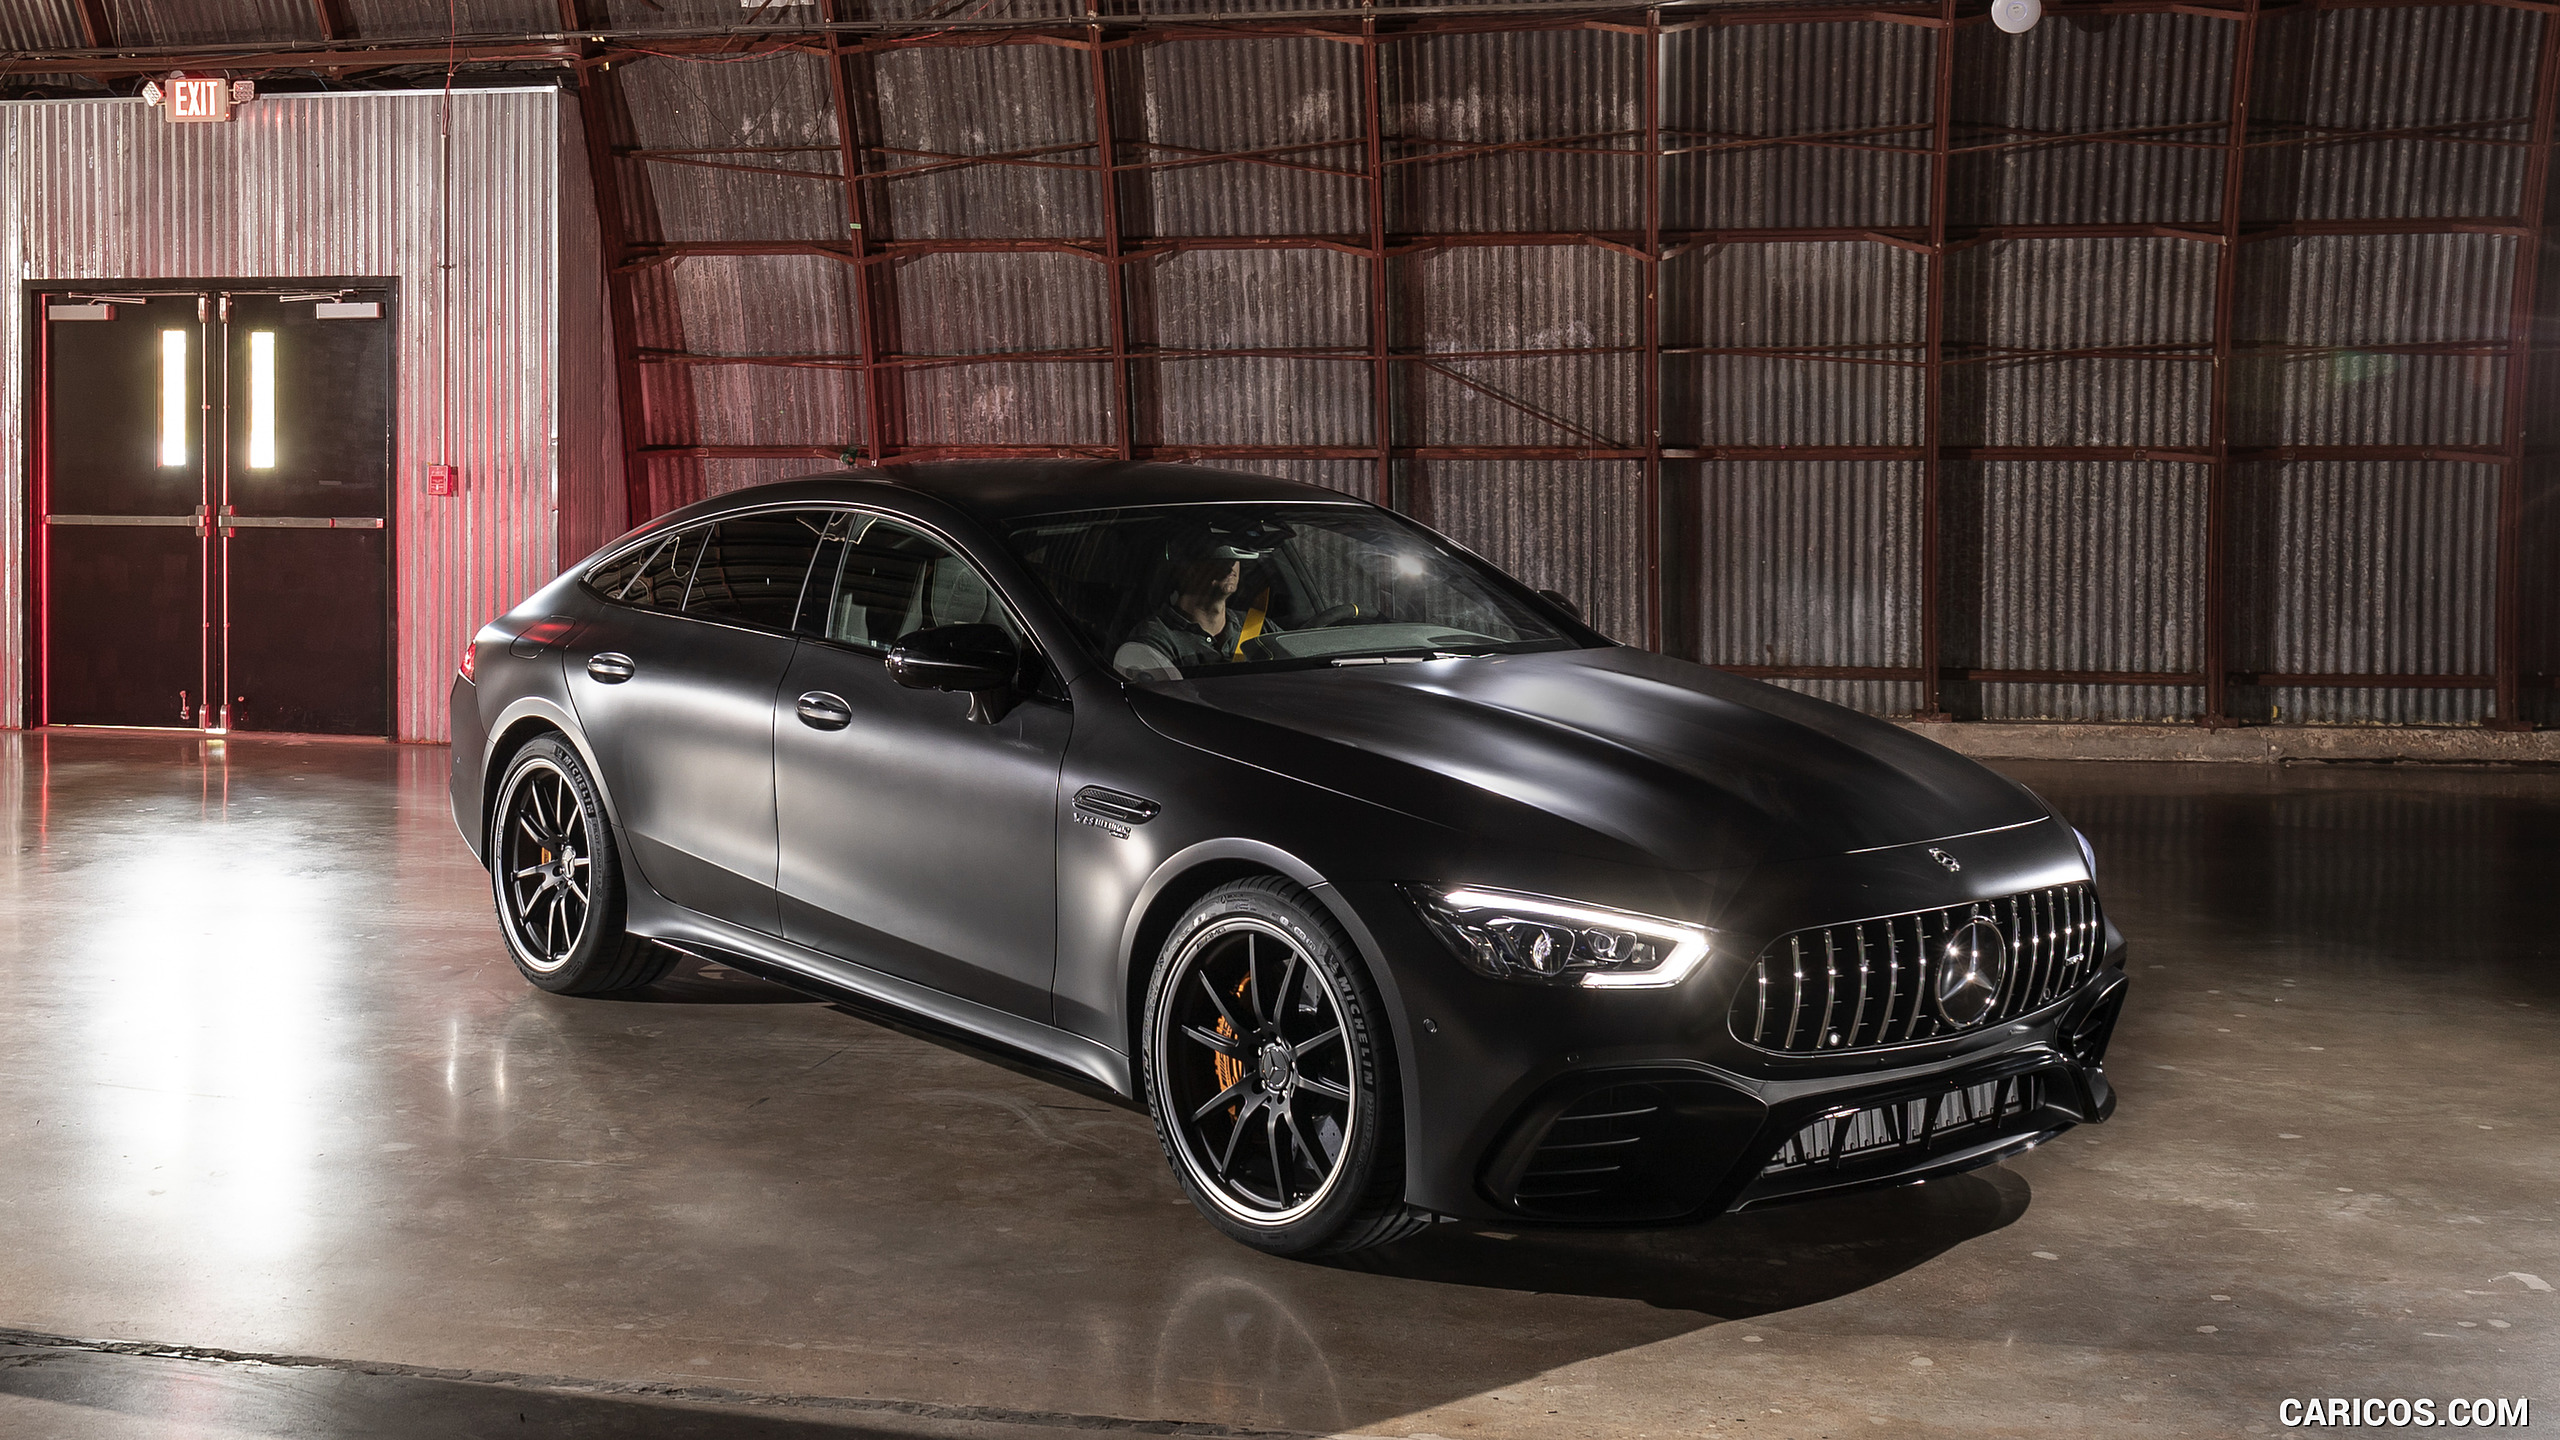 2019 Mercedes-AMG GT 63 S 4MATIC+ 4-Door Coupe - Front Three-Quarter, #222 of 427